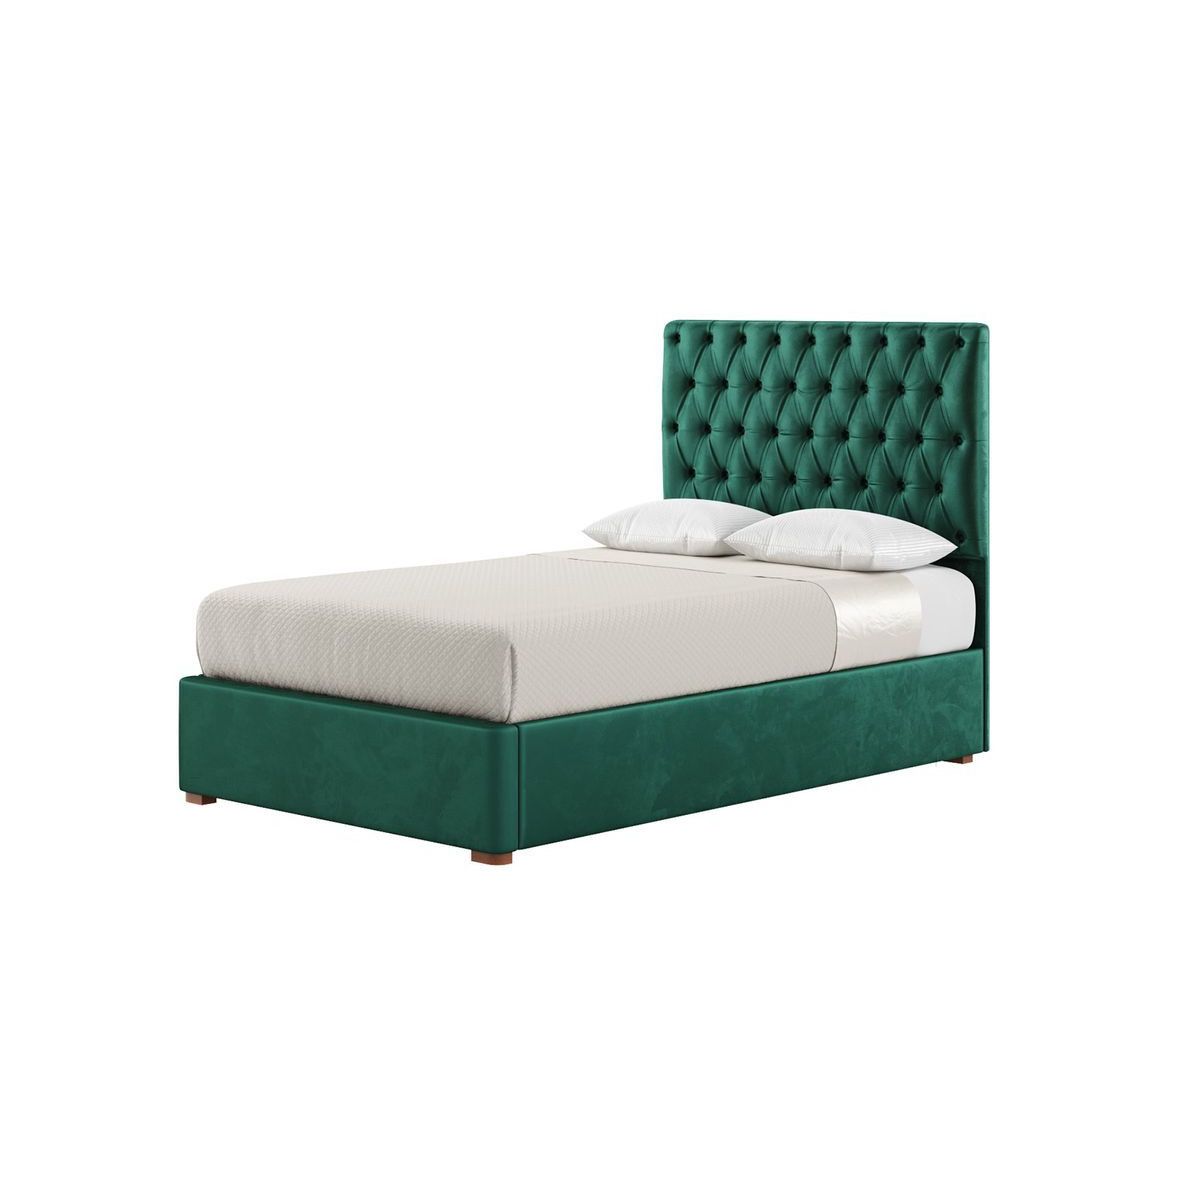 Jewel 4ft Small Double Bed Frame With Luxury Deep Button Quilted Headboard, dark green, Leg colour: aveo - image 1